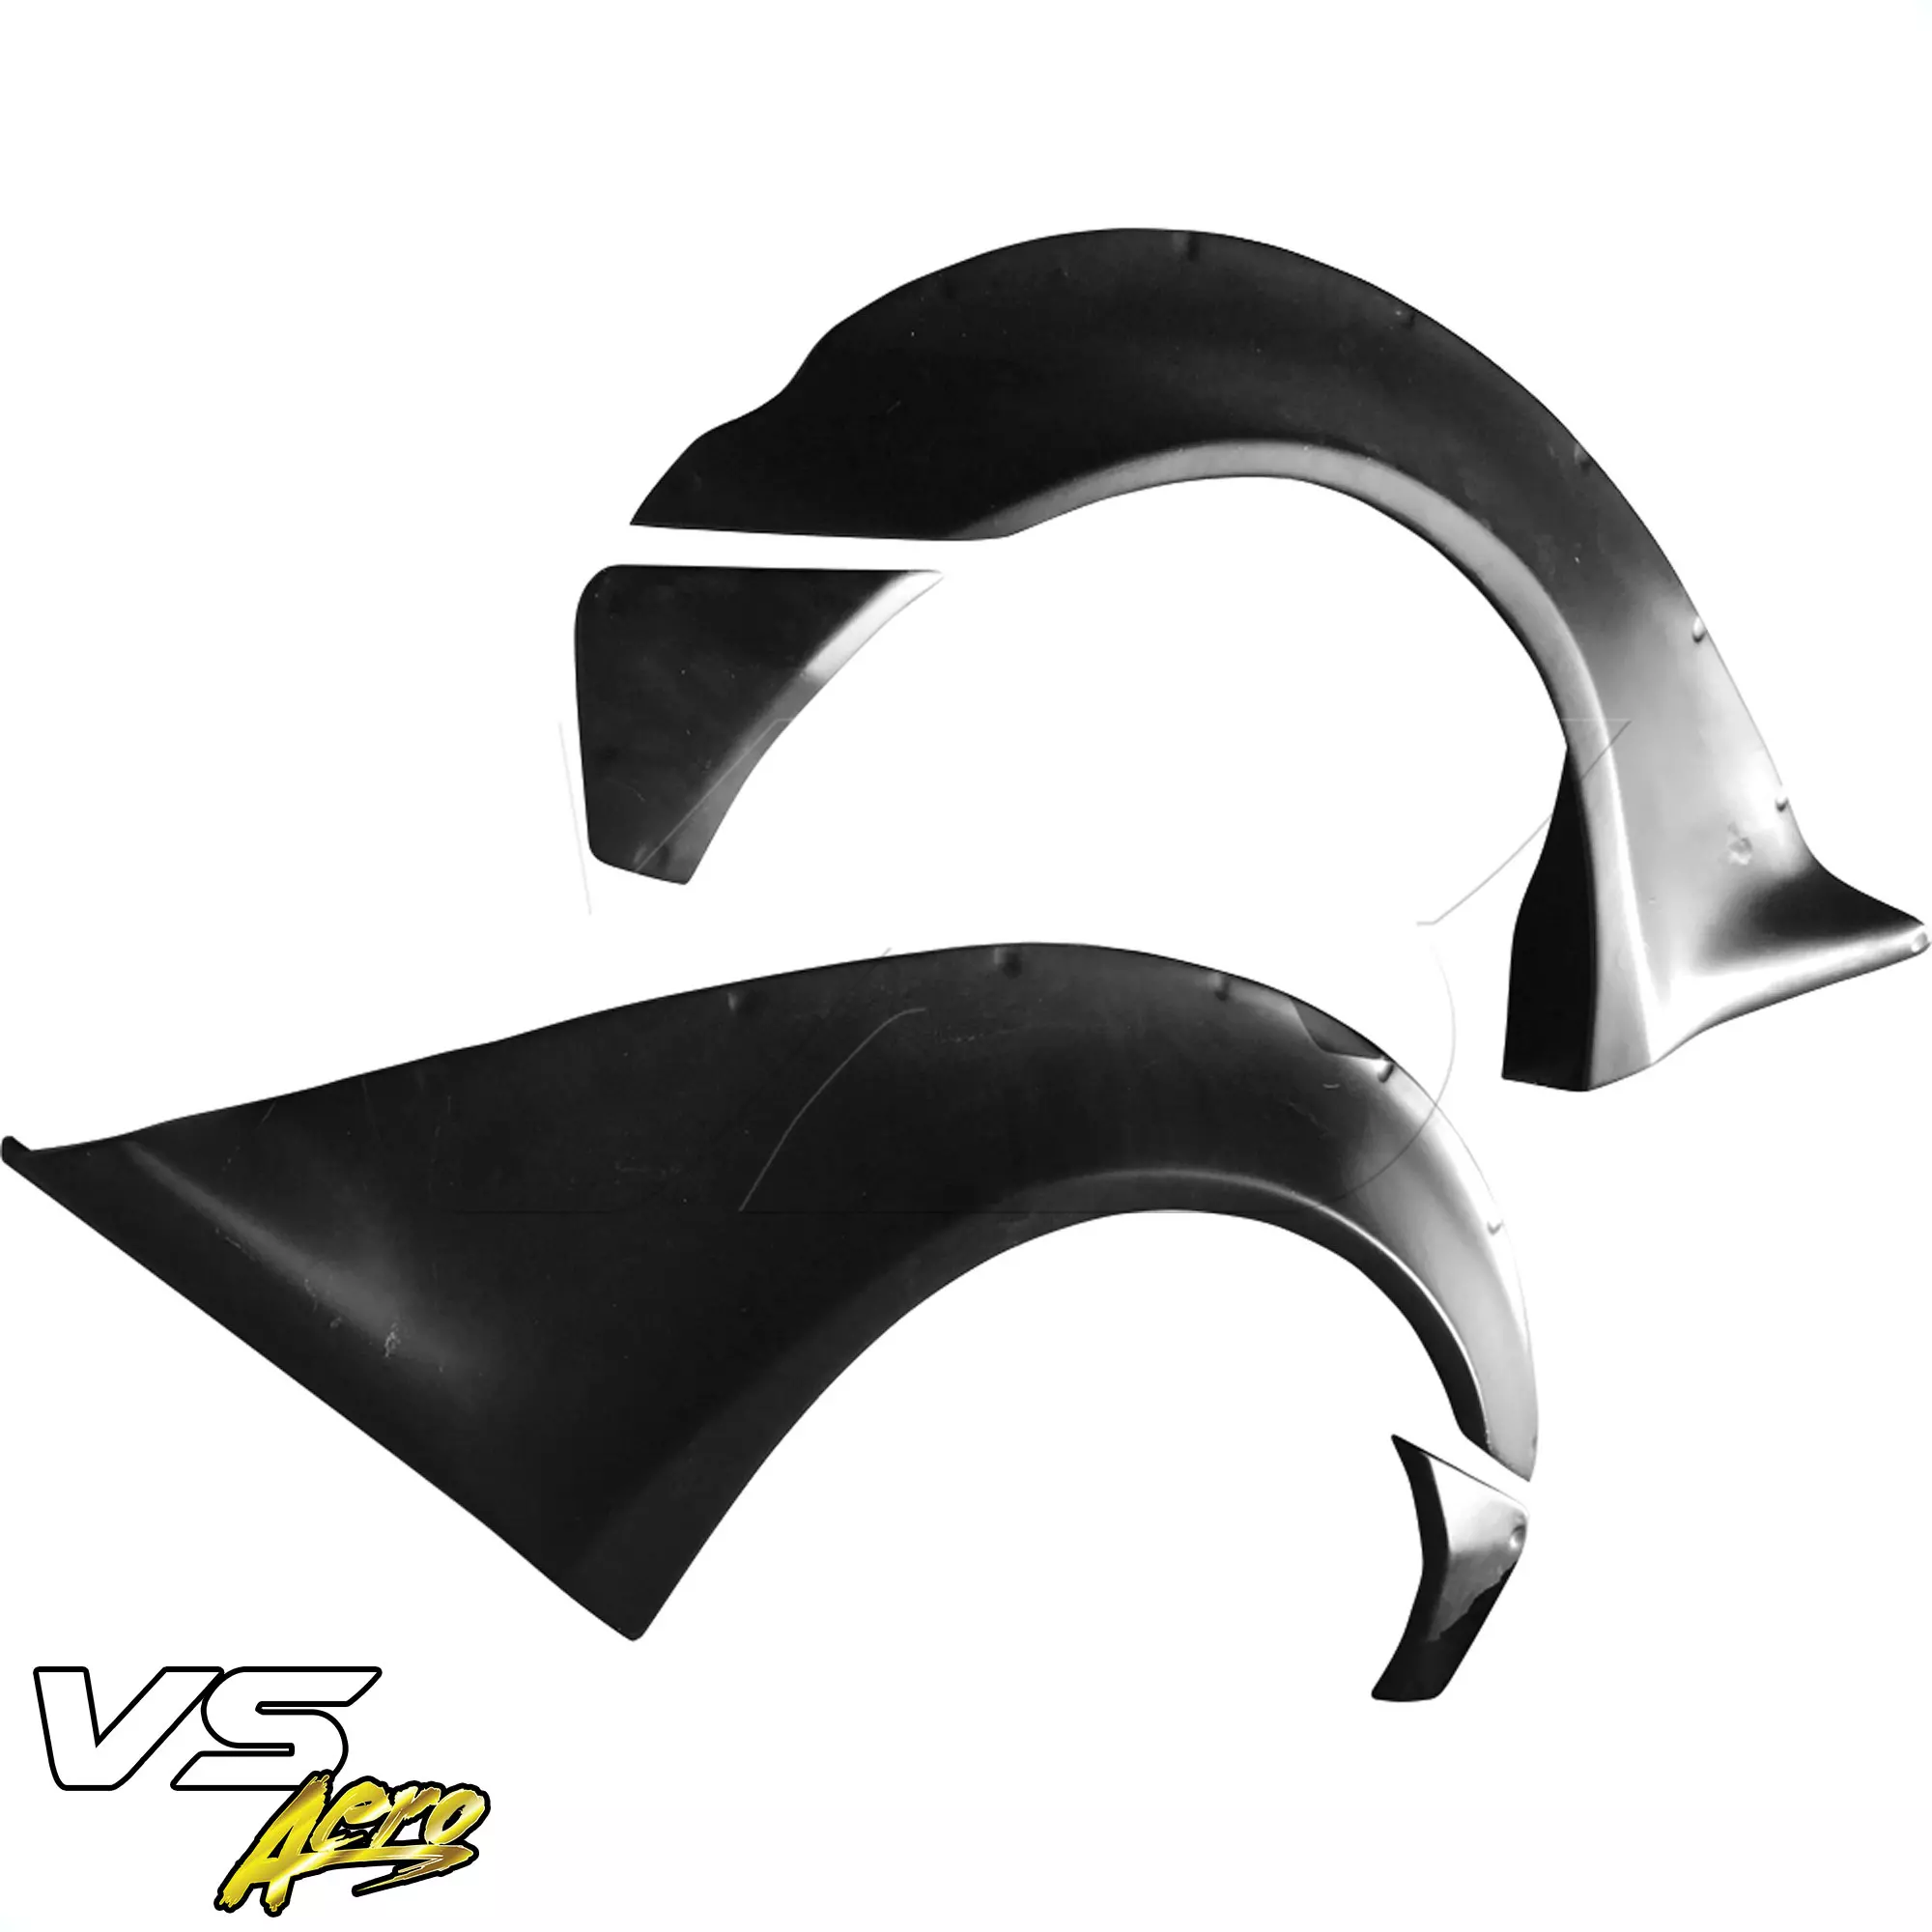 VSaero FRP LBPE Wide Body Fender Flares (rear) 4pc > Infiniti G37 Coupe 2008-2015 > 2dr Coupe - Image 14